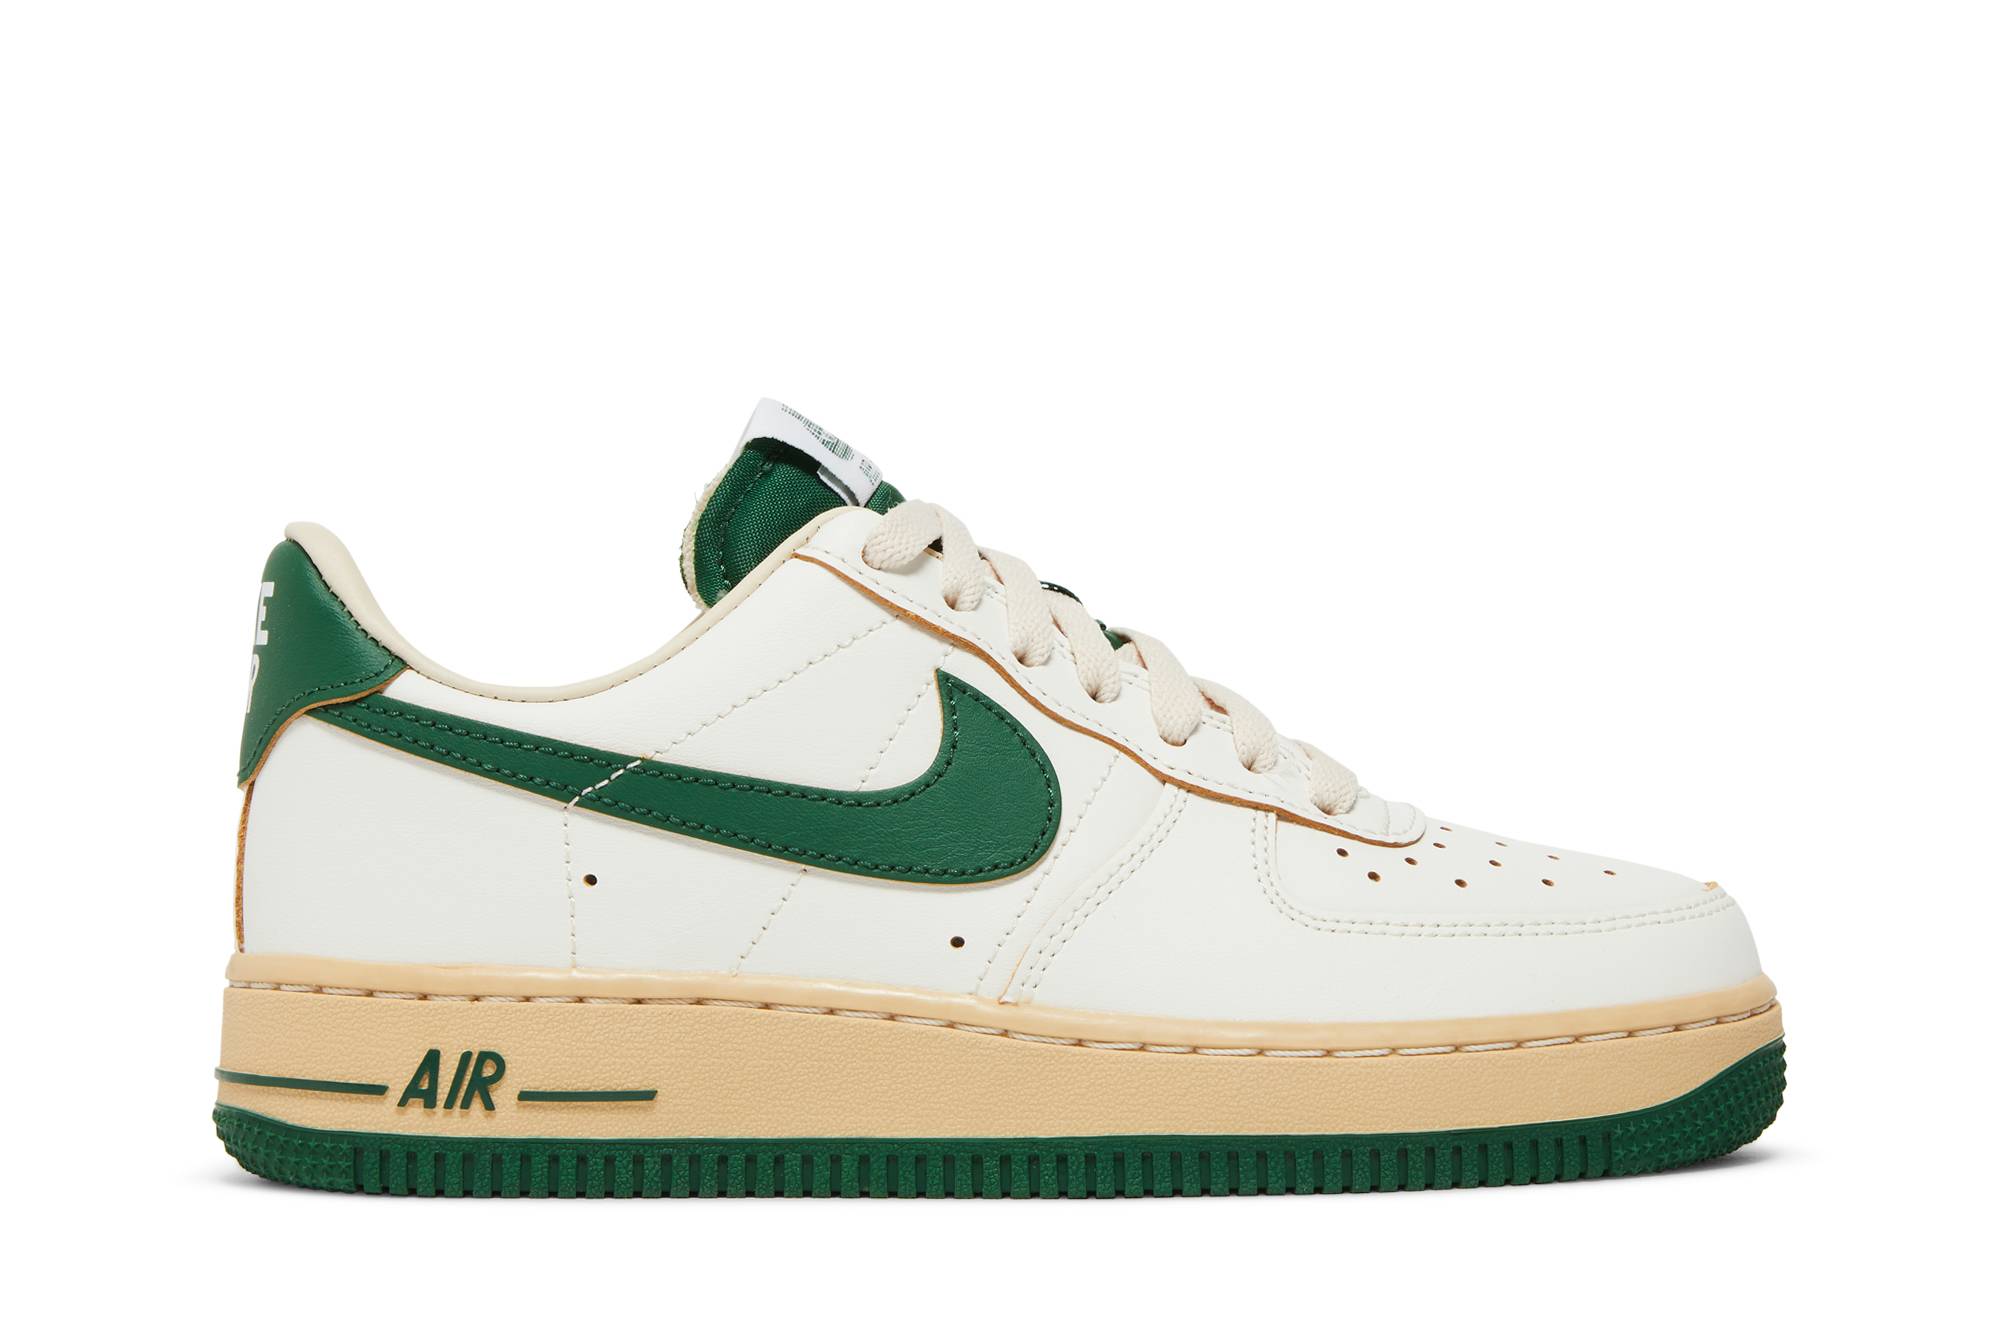 Nike Air Force 1 Low 'Green and Muslin' WMNS